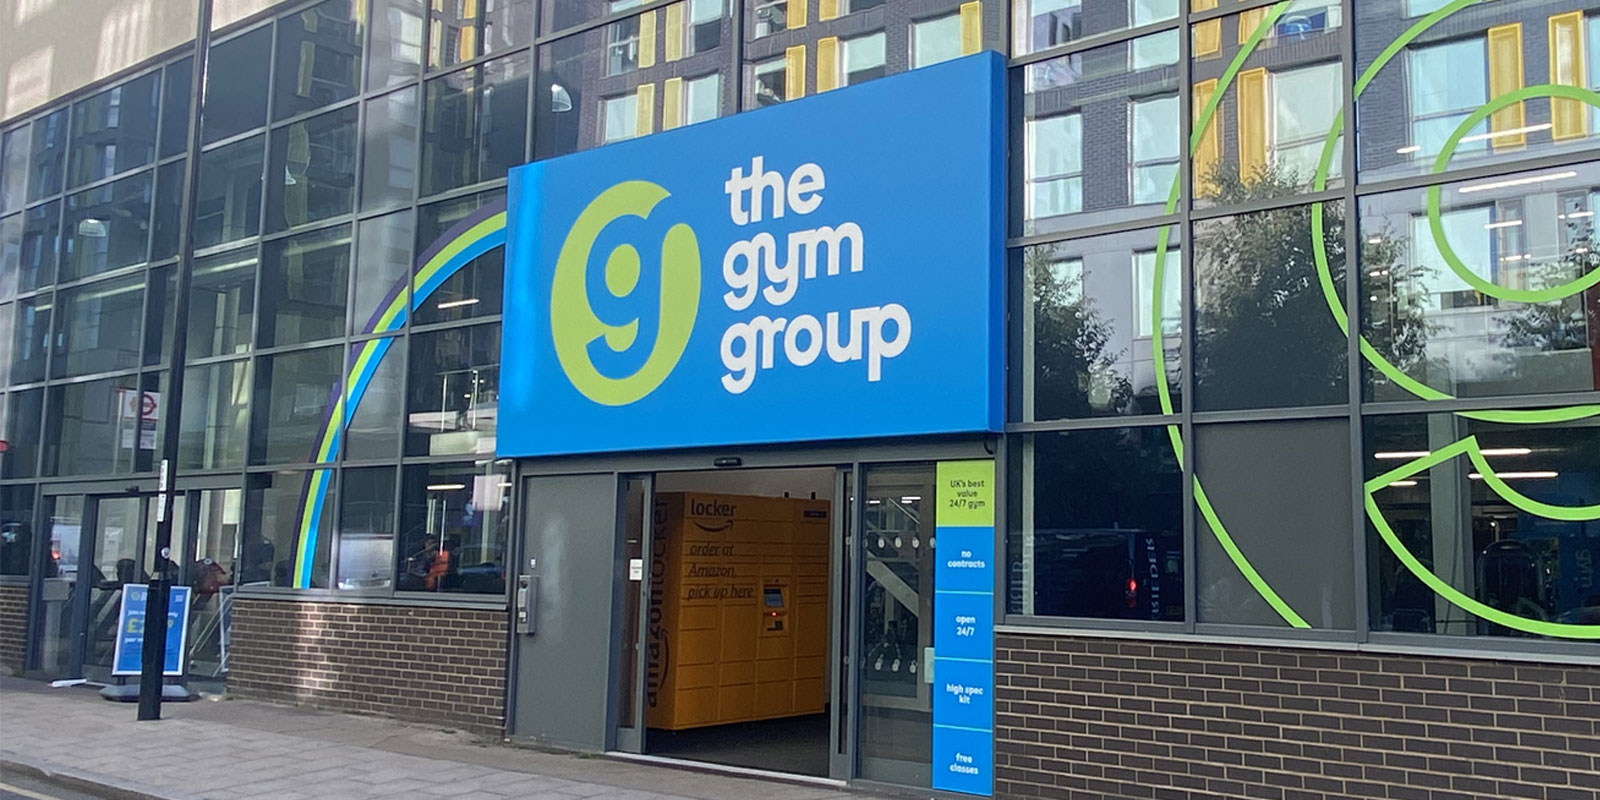 Blaze Signs project at The Gym Group - Case Study